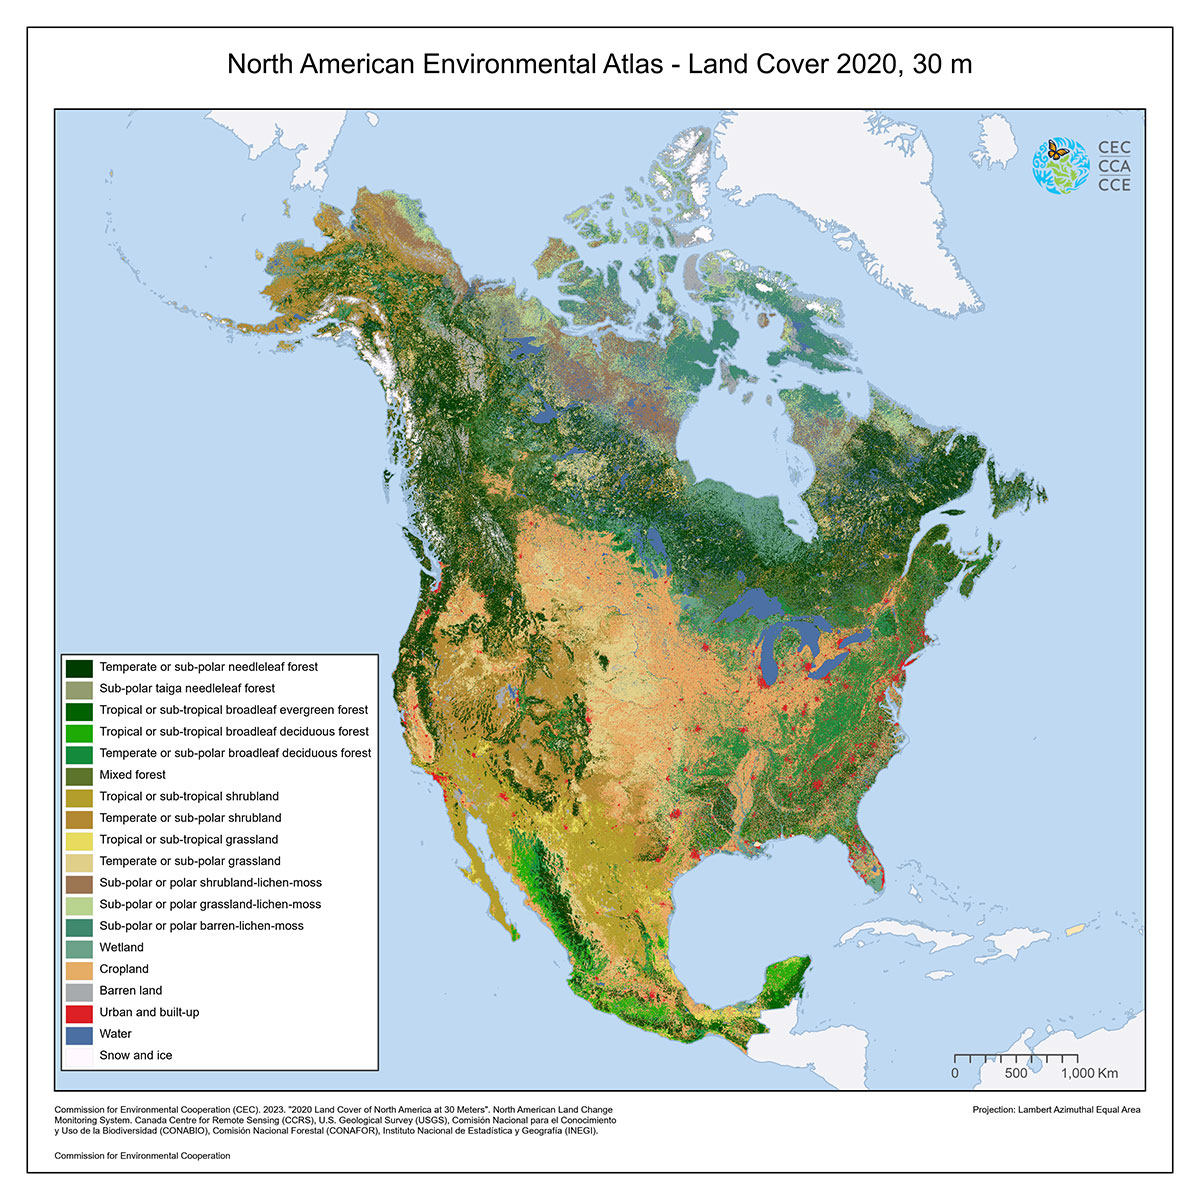 Land Cover Map